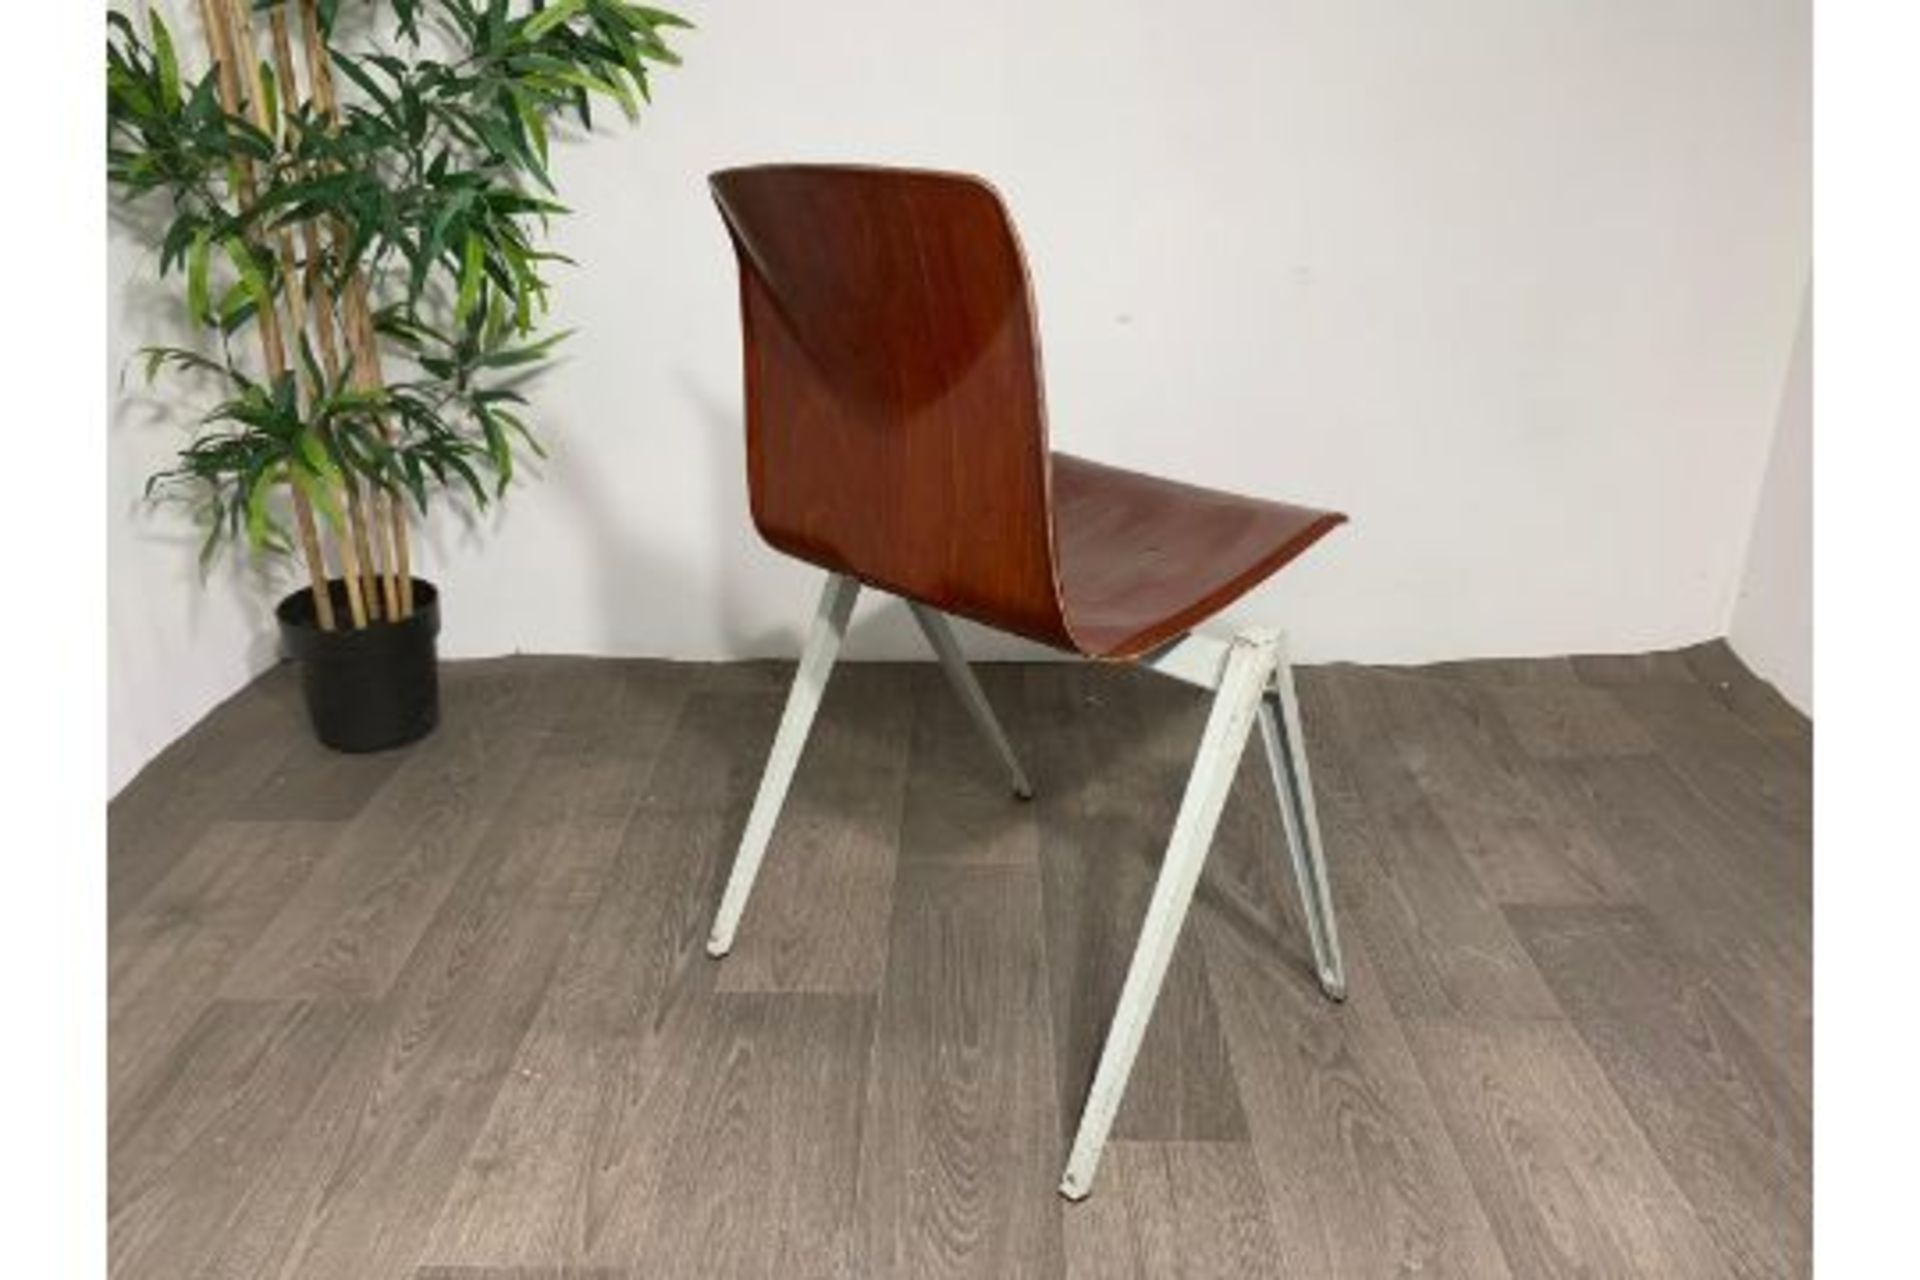 Thur Op Seat Stackable Chair in mahogany resin x2 - Image 2 of 6